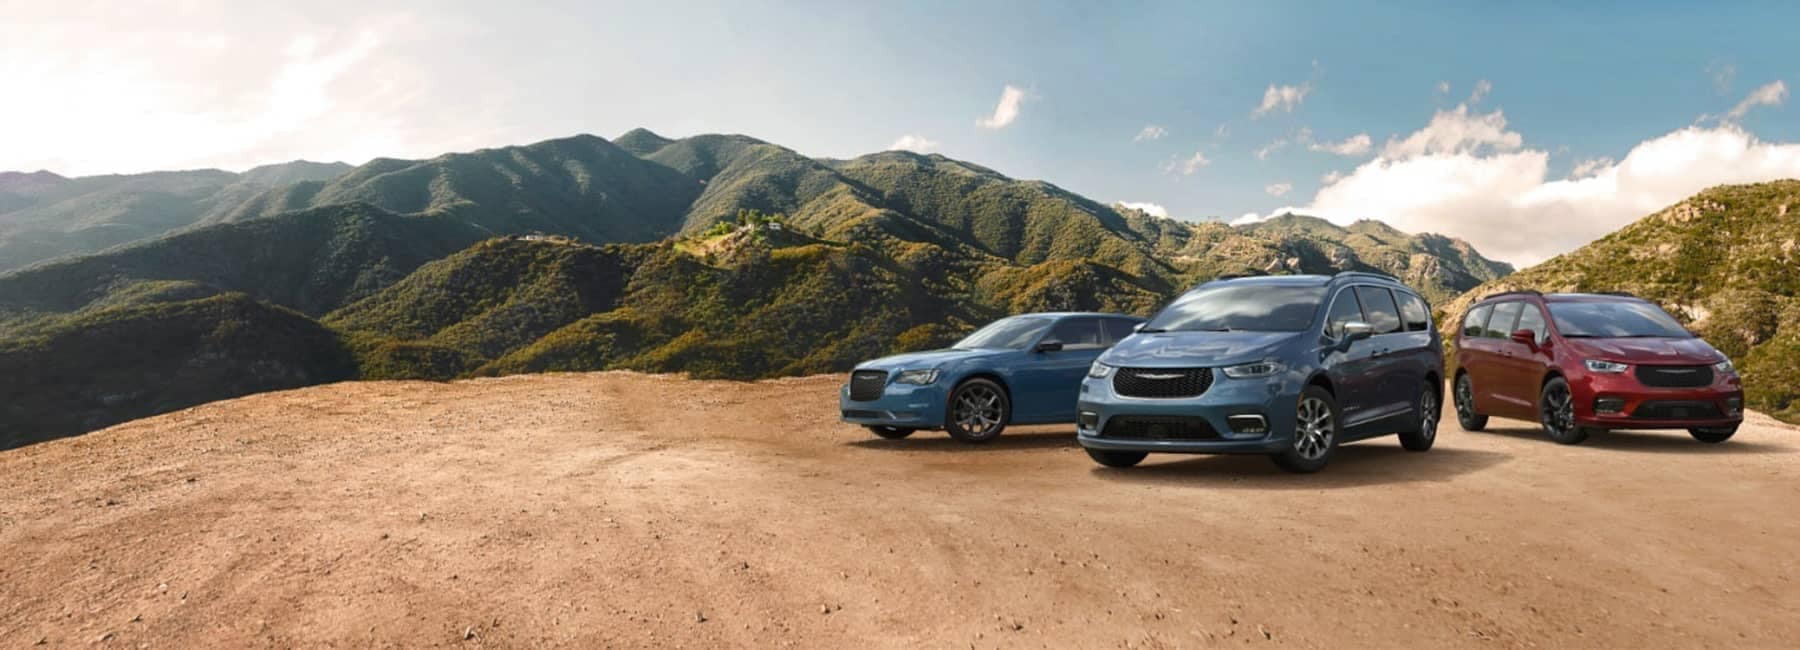 2023 Chrysler Models parked on dirt with mountains